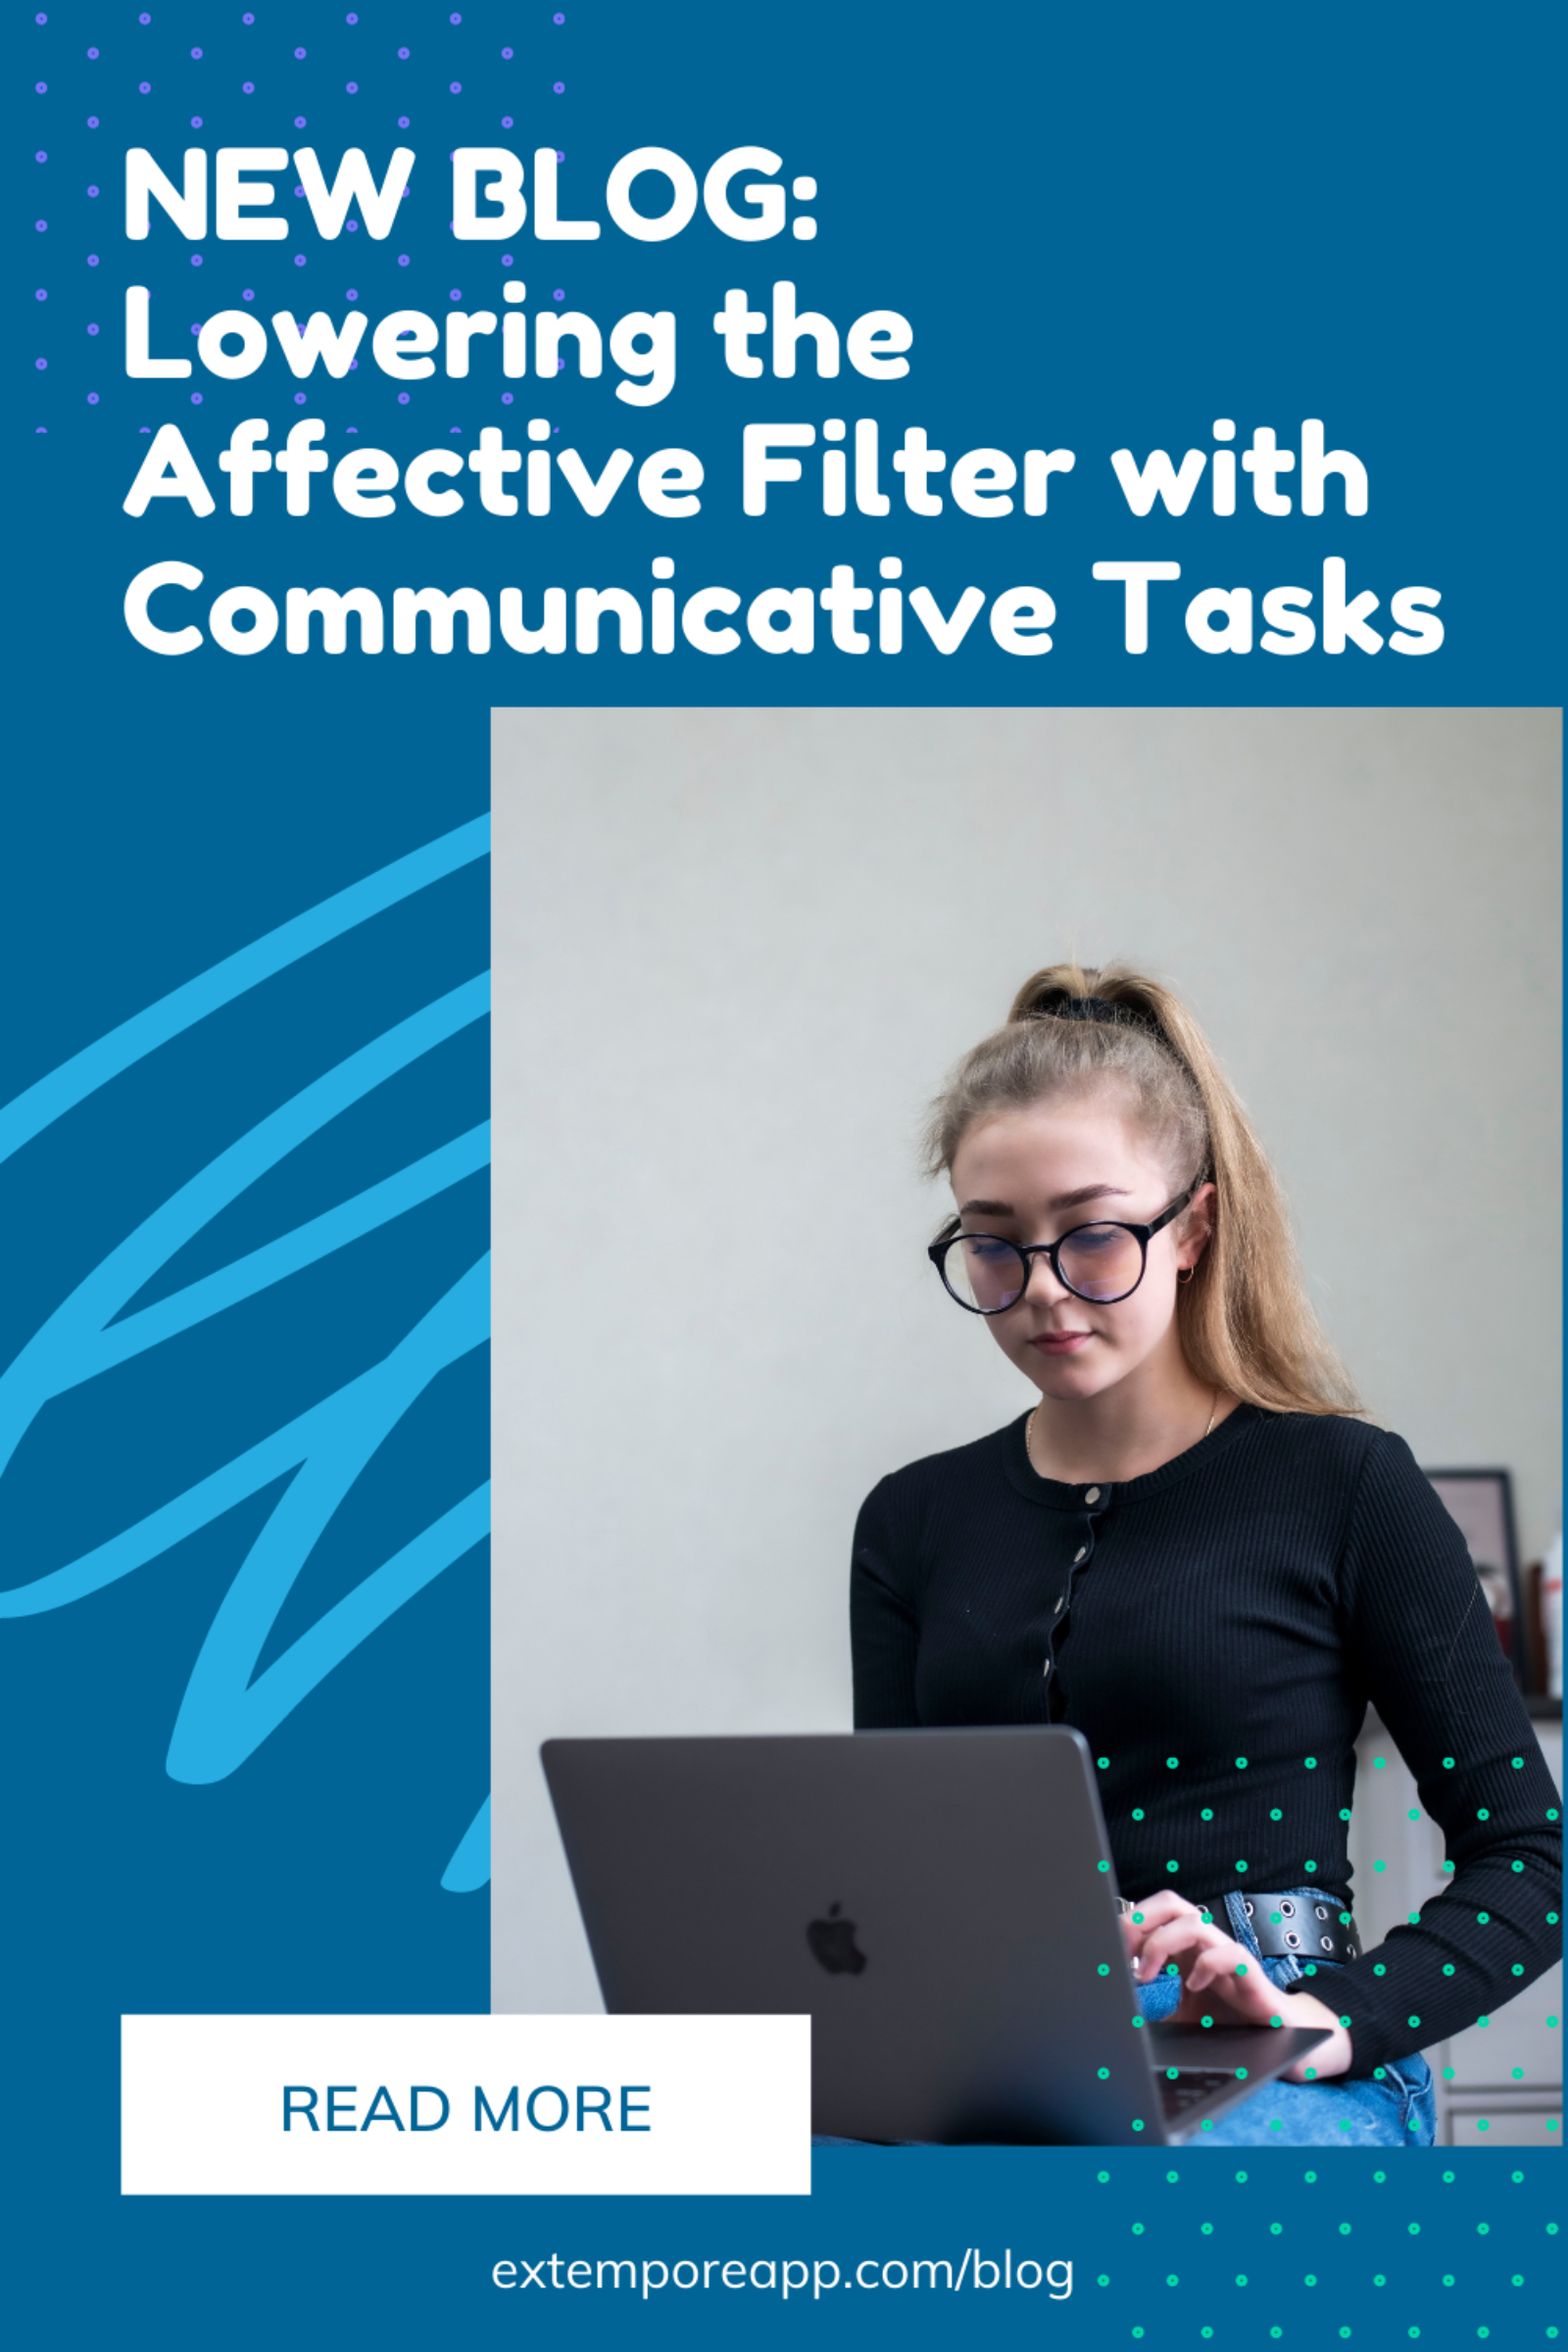 Lowering the Affective Filter